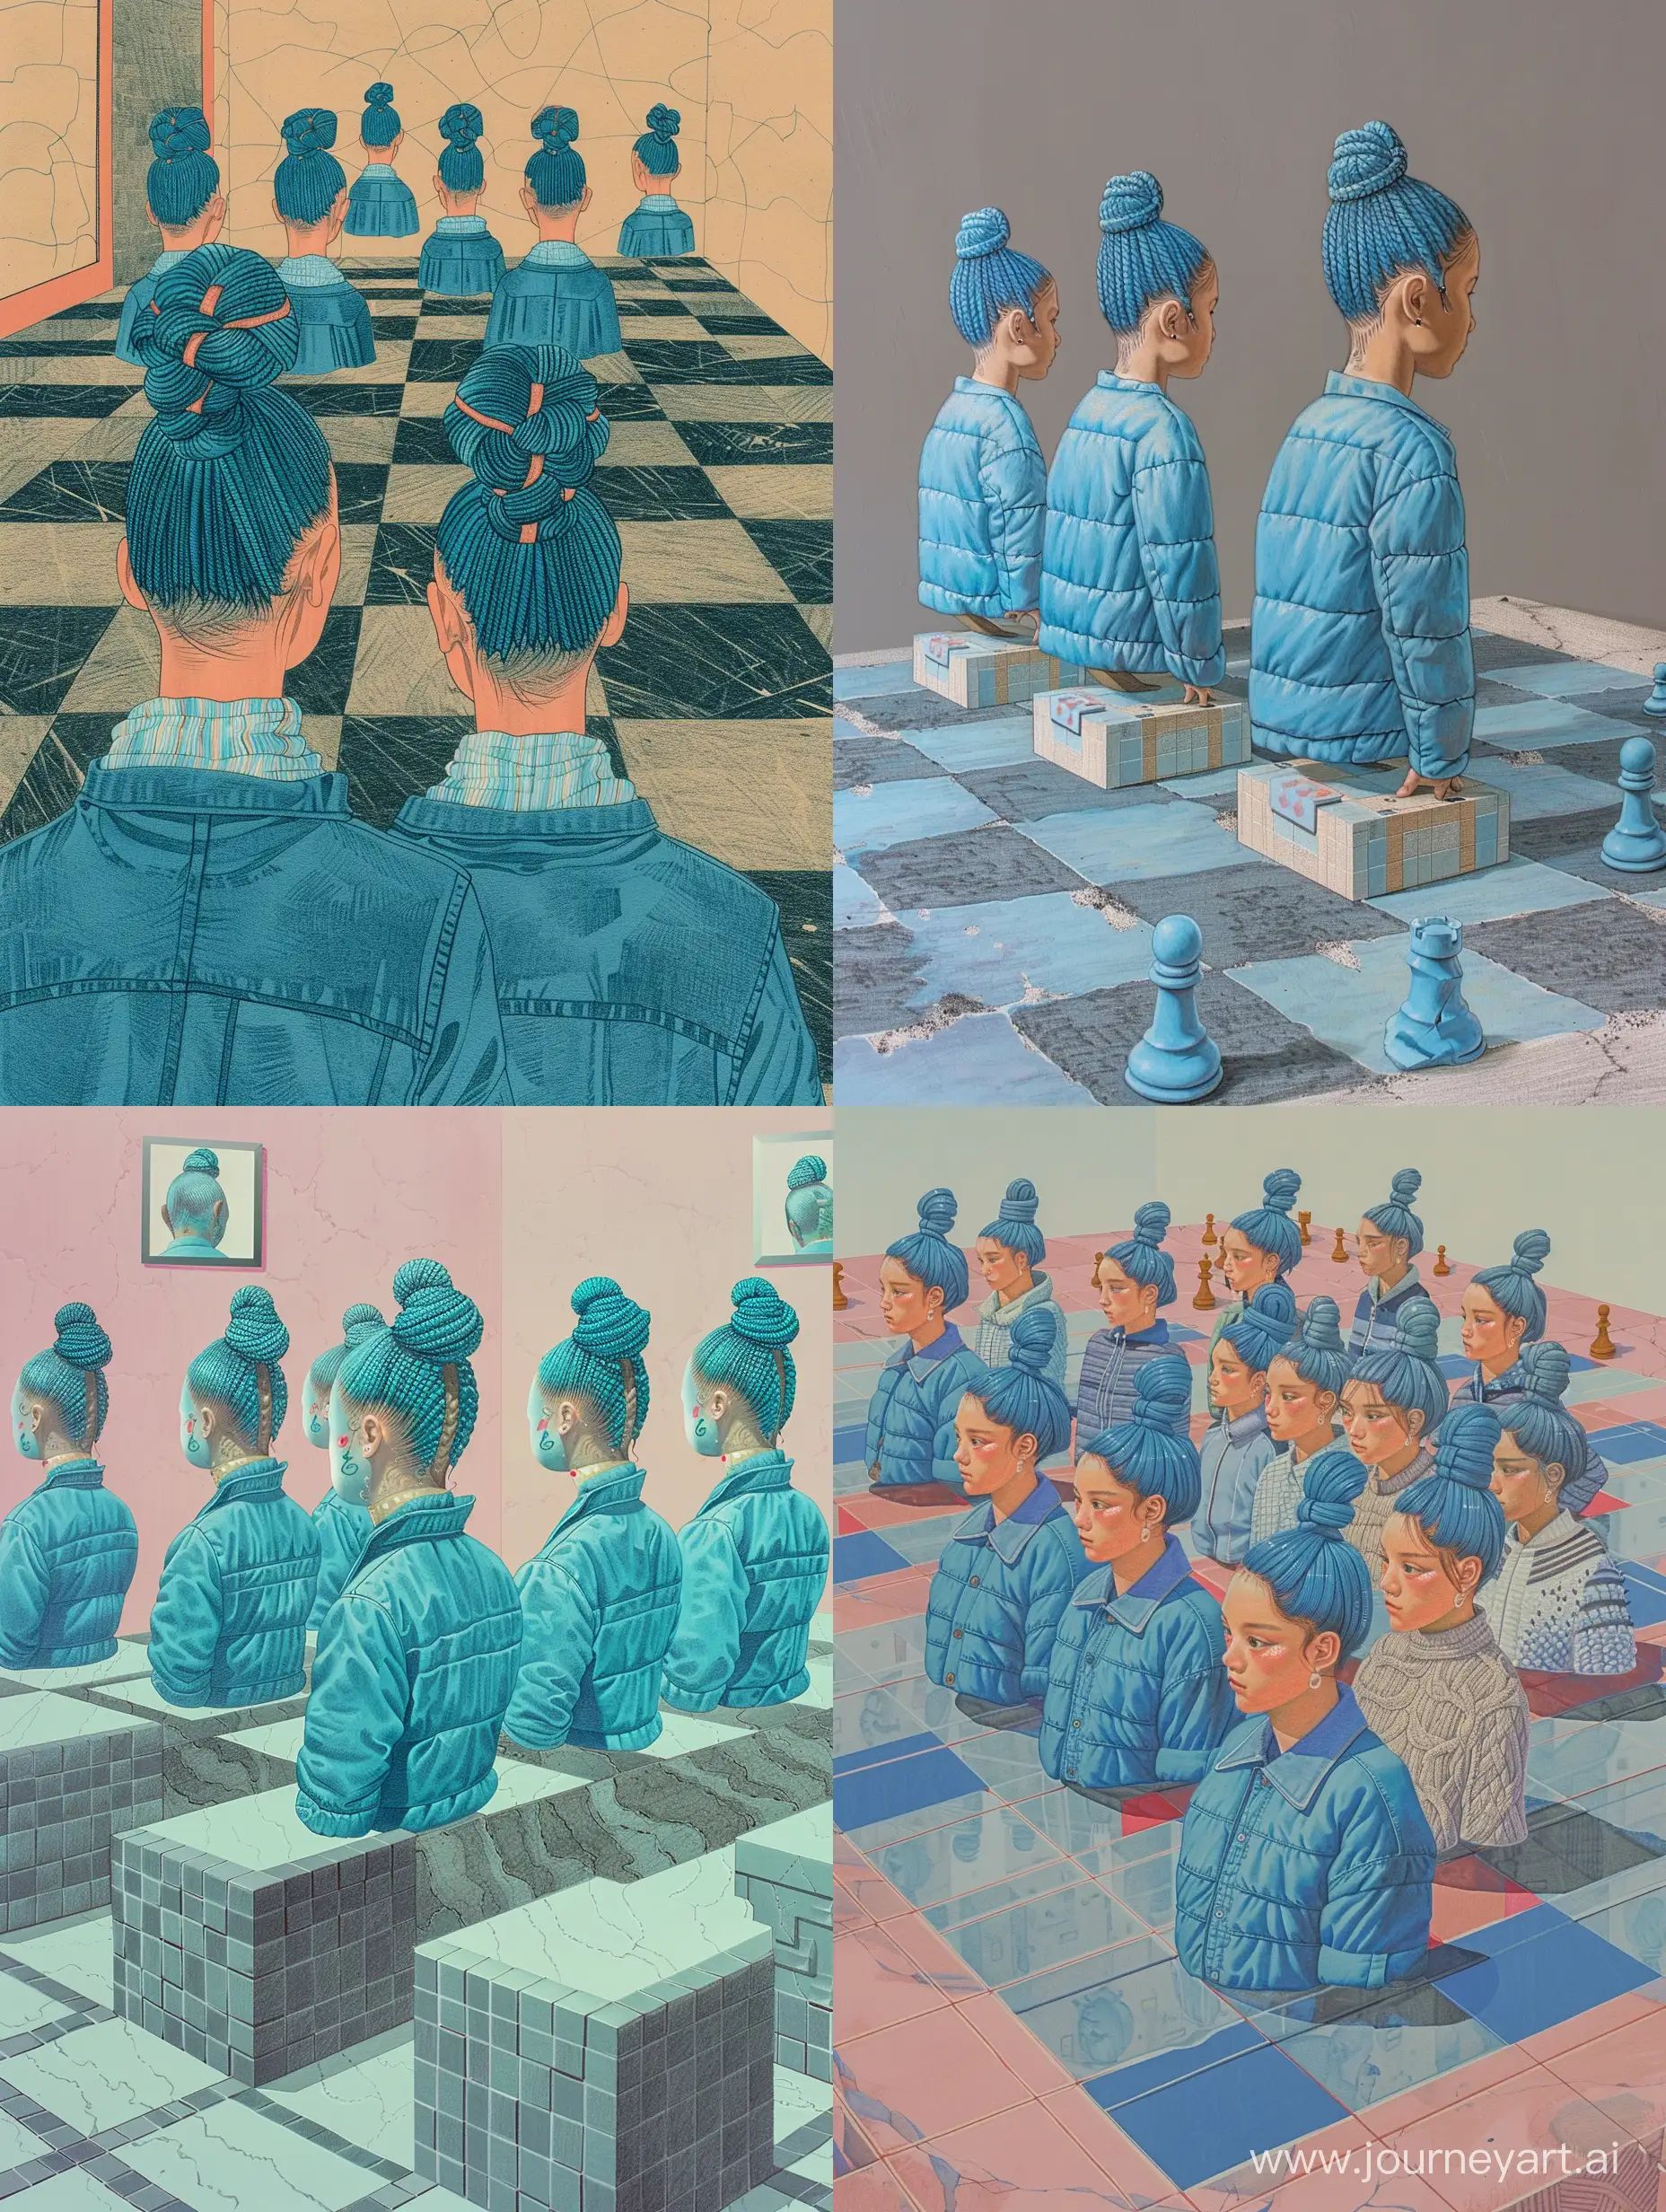 Fantasy-Chessboard-with-Identical-Girls-in-Blue-Jackets-and-Braids